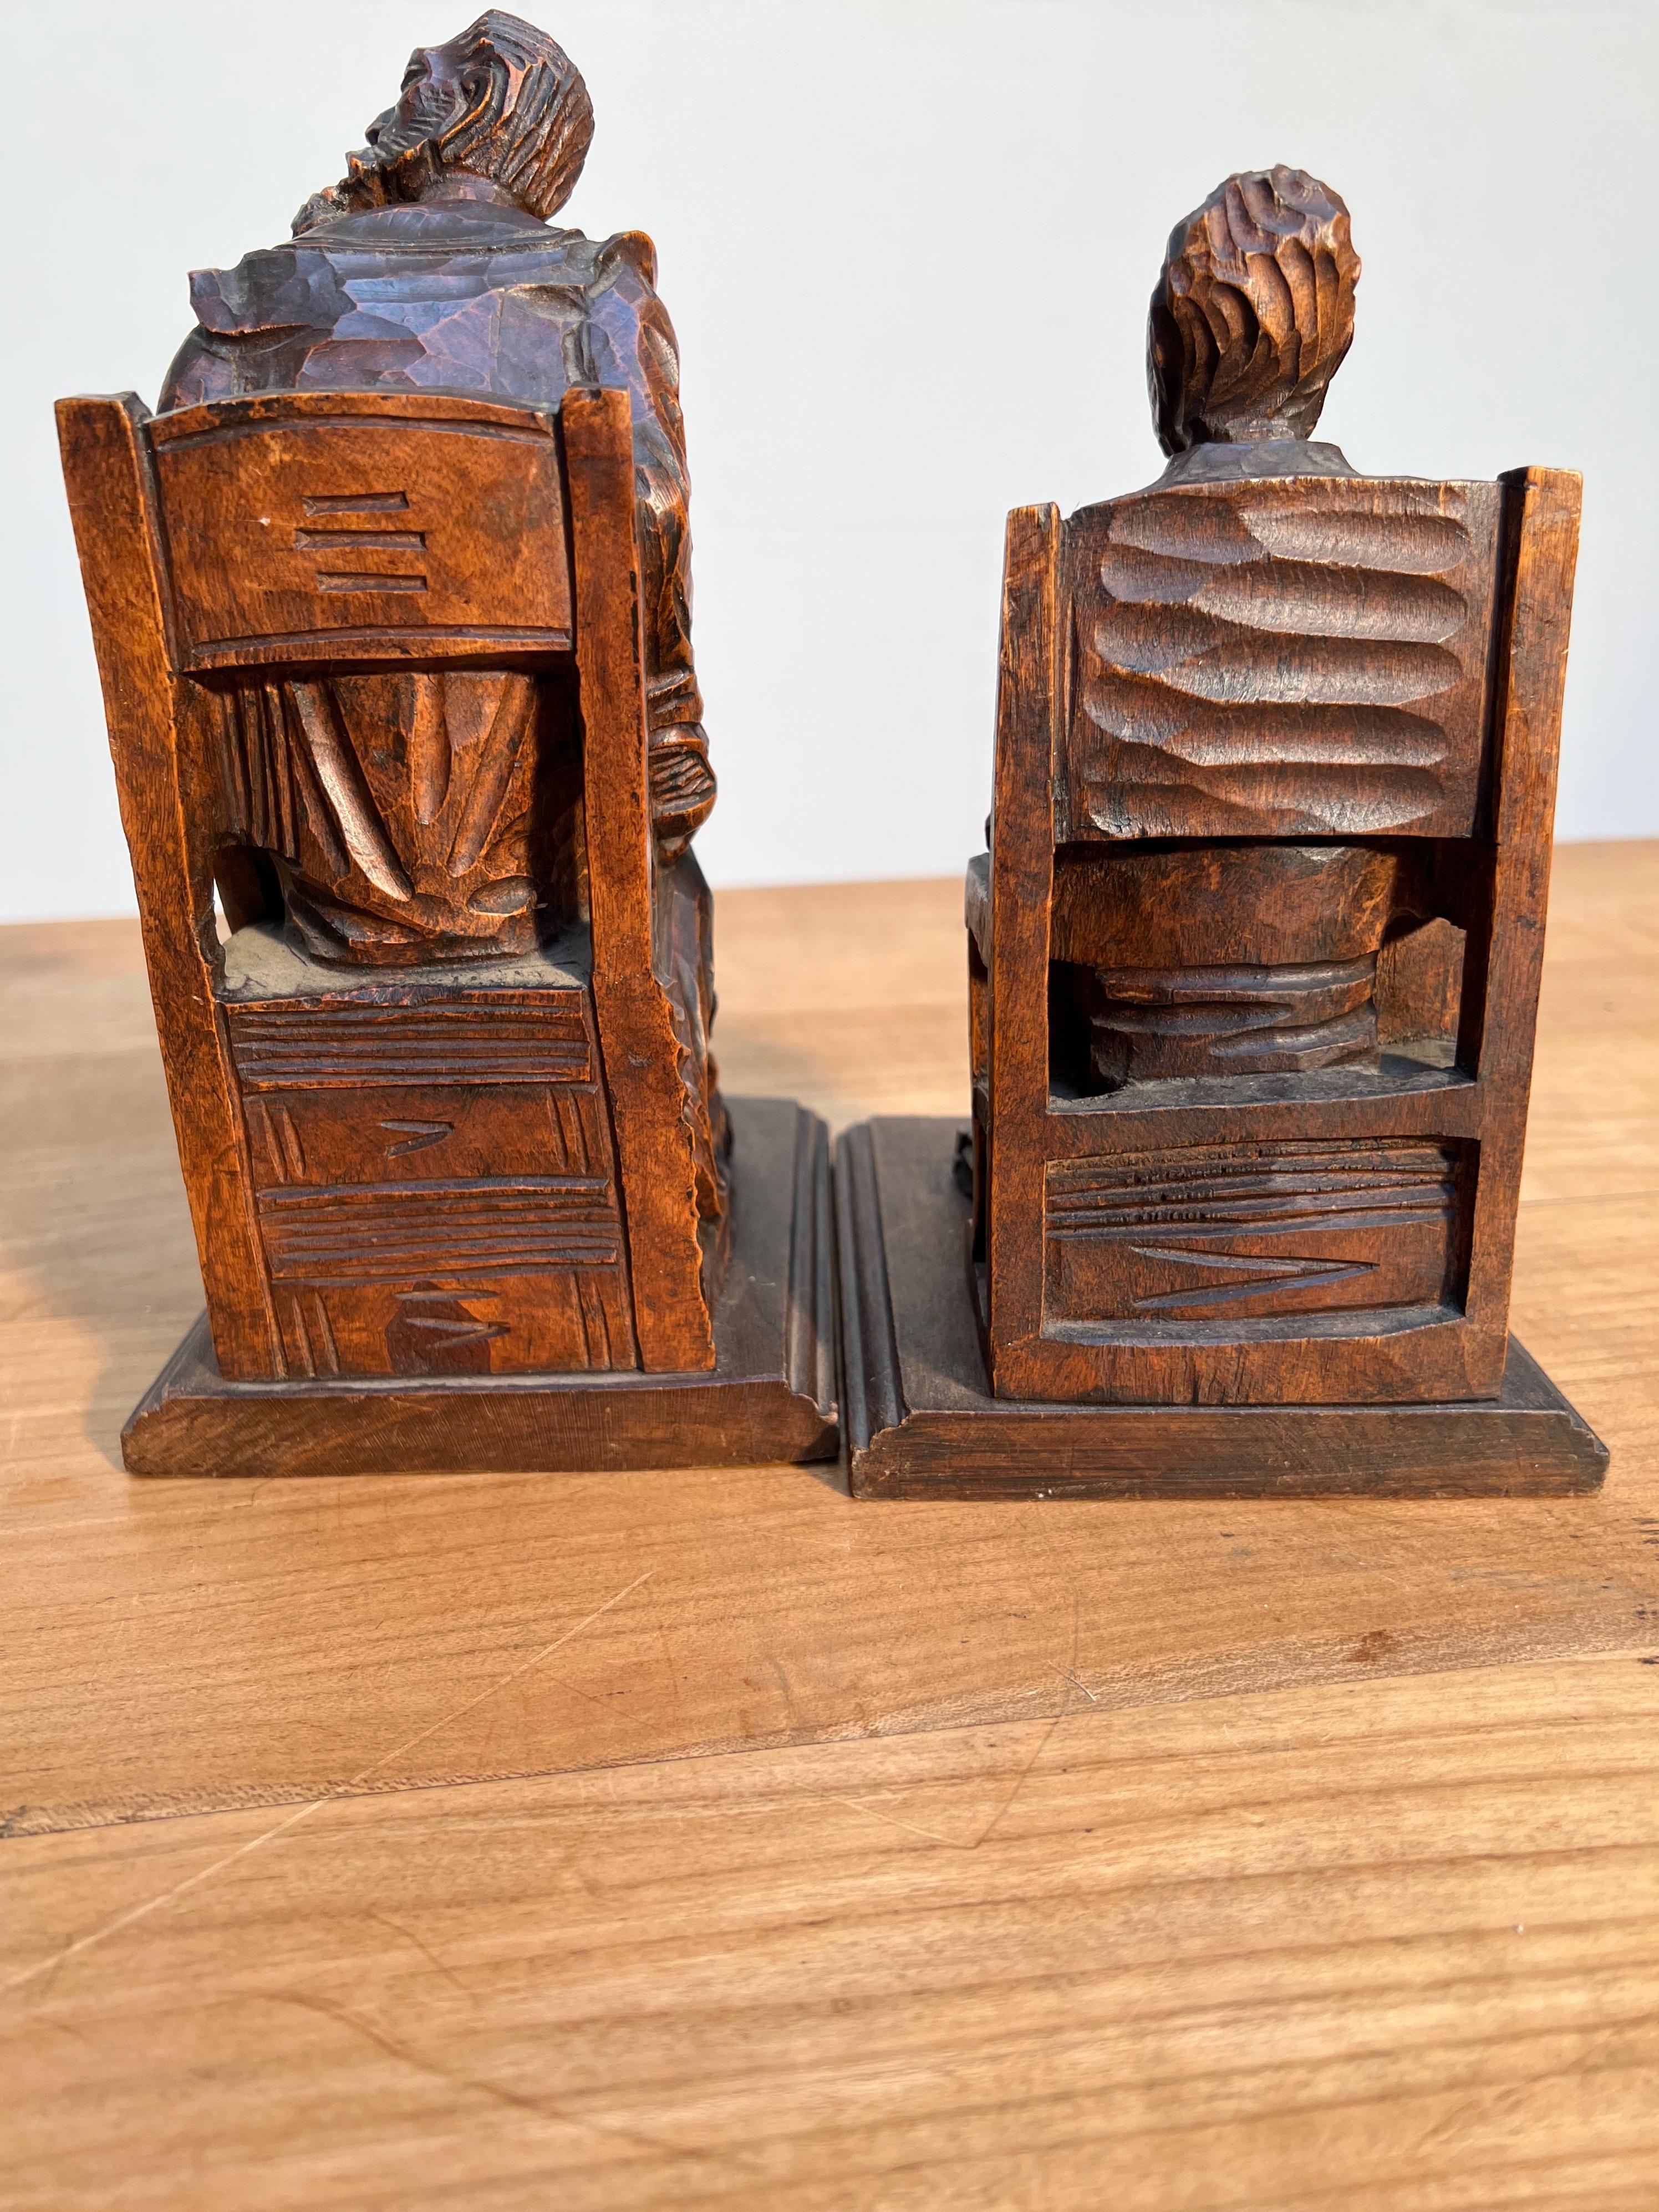 Good Size Pair of Hand Carved & Patinated Don Quixote and Sancho Panza Bookends For Sale 3